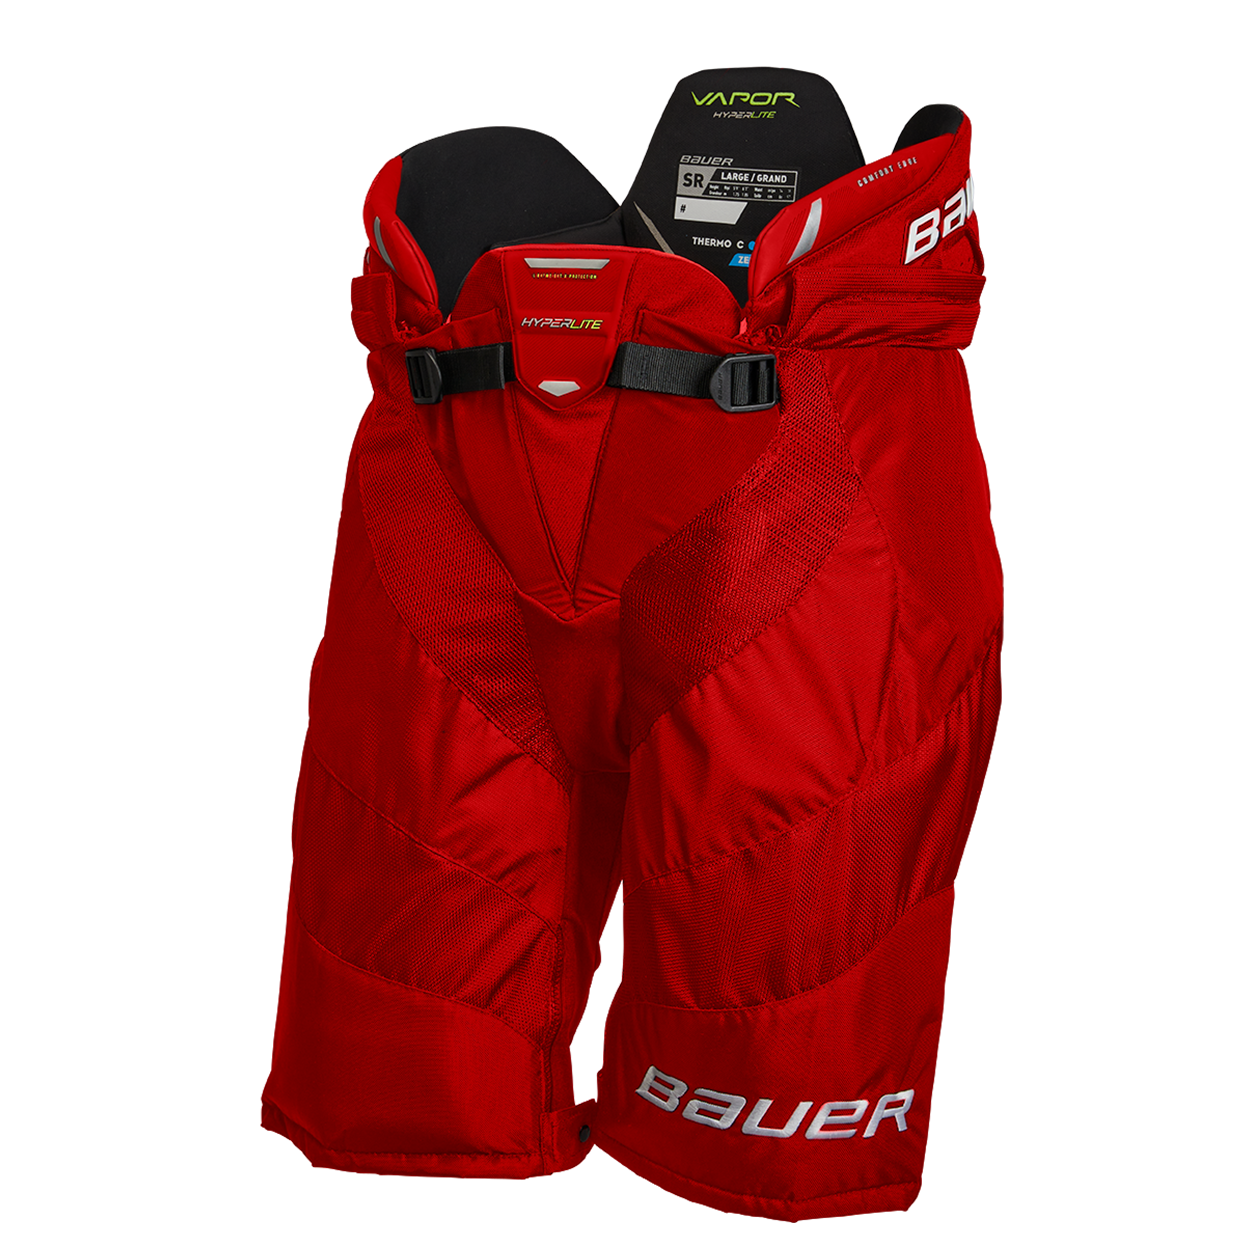 NOS SUPREME BAUER HP 3000J ICE HOCKEY PANTS TRUE FIT SYSTEM - SIZE